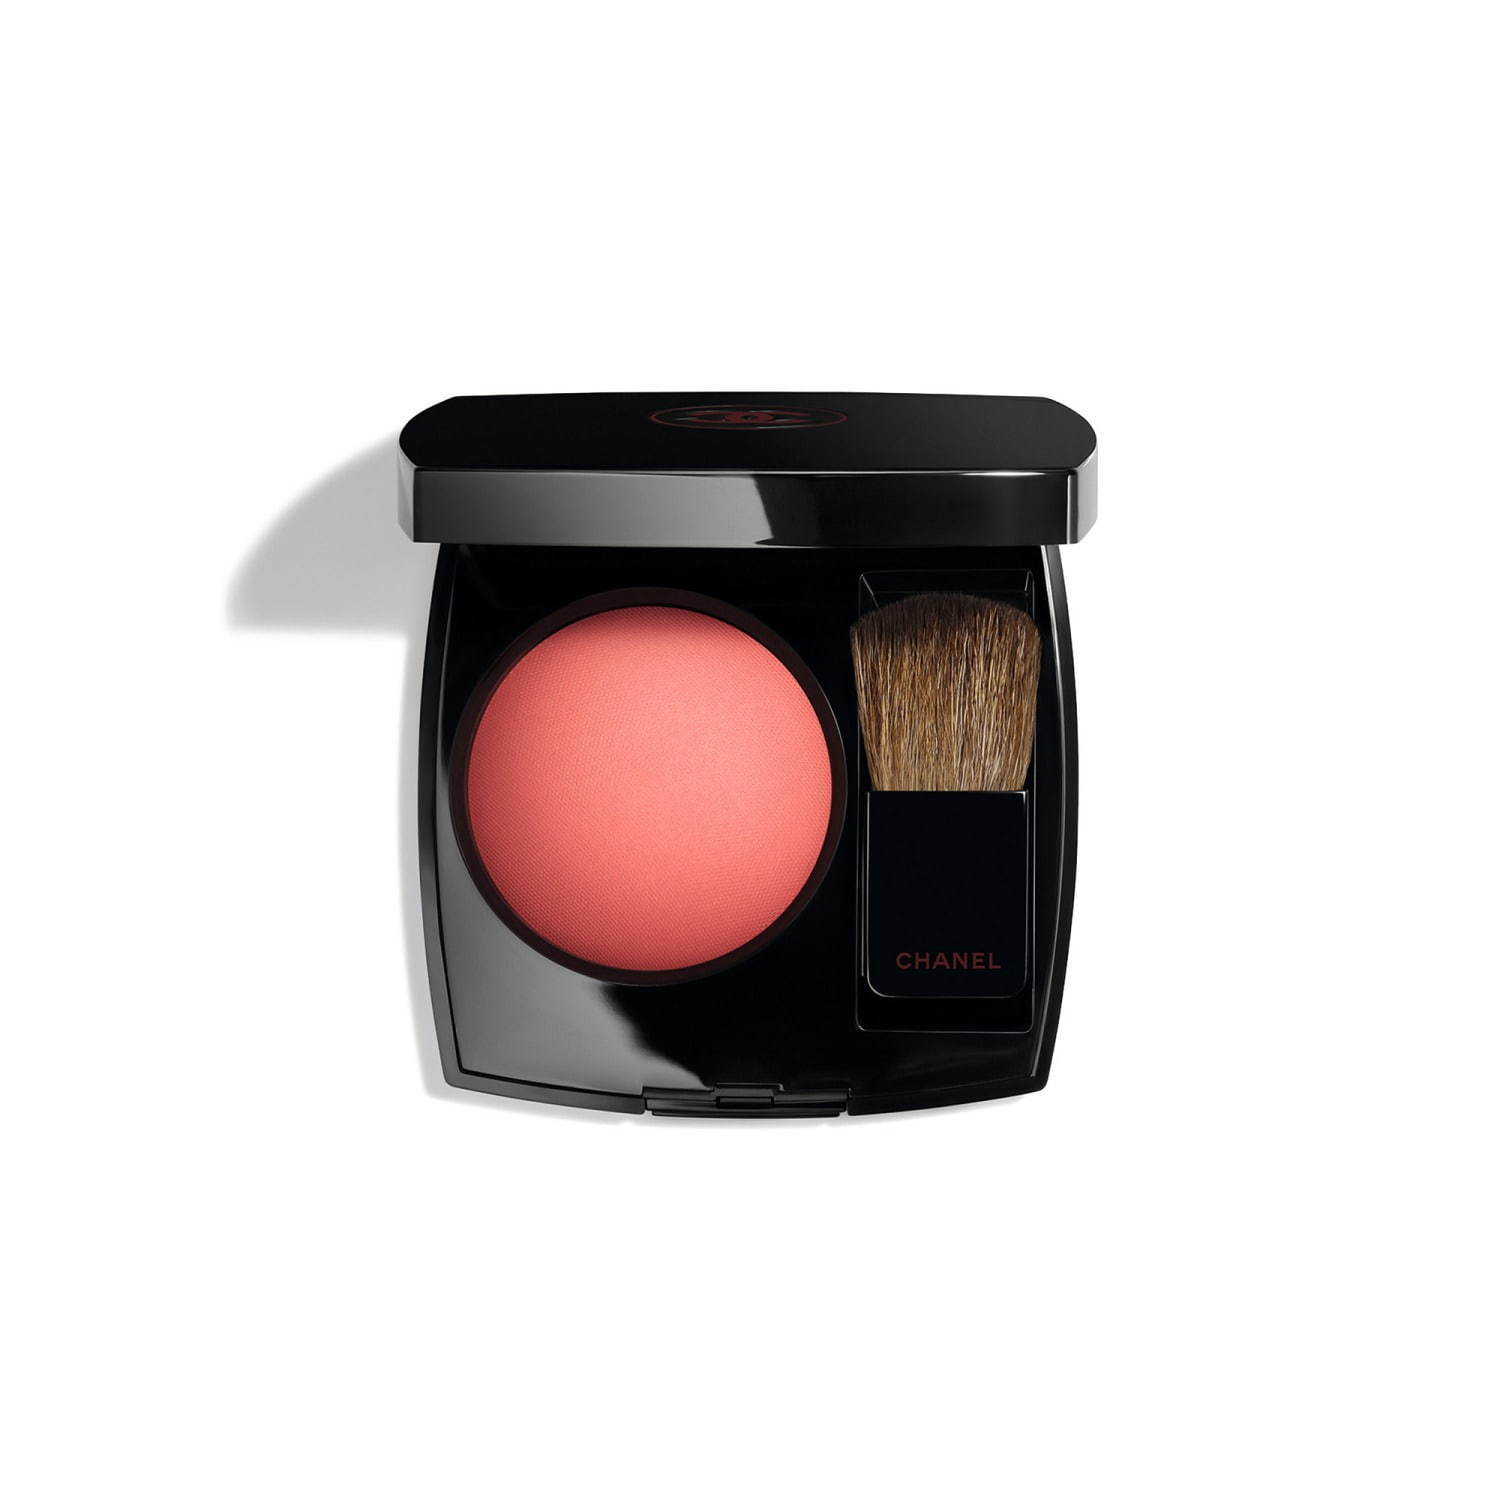 3 - CHANEL The popular Blush limited 2020